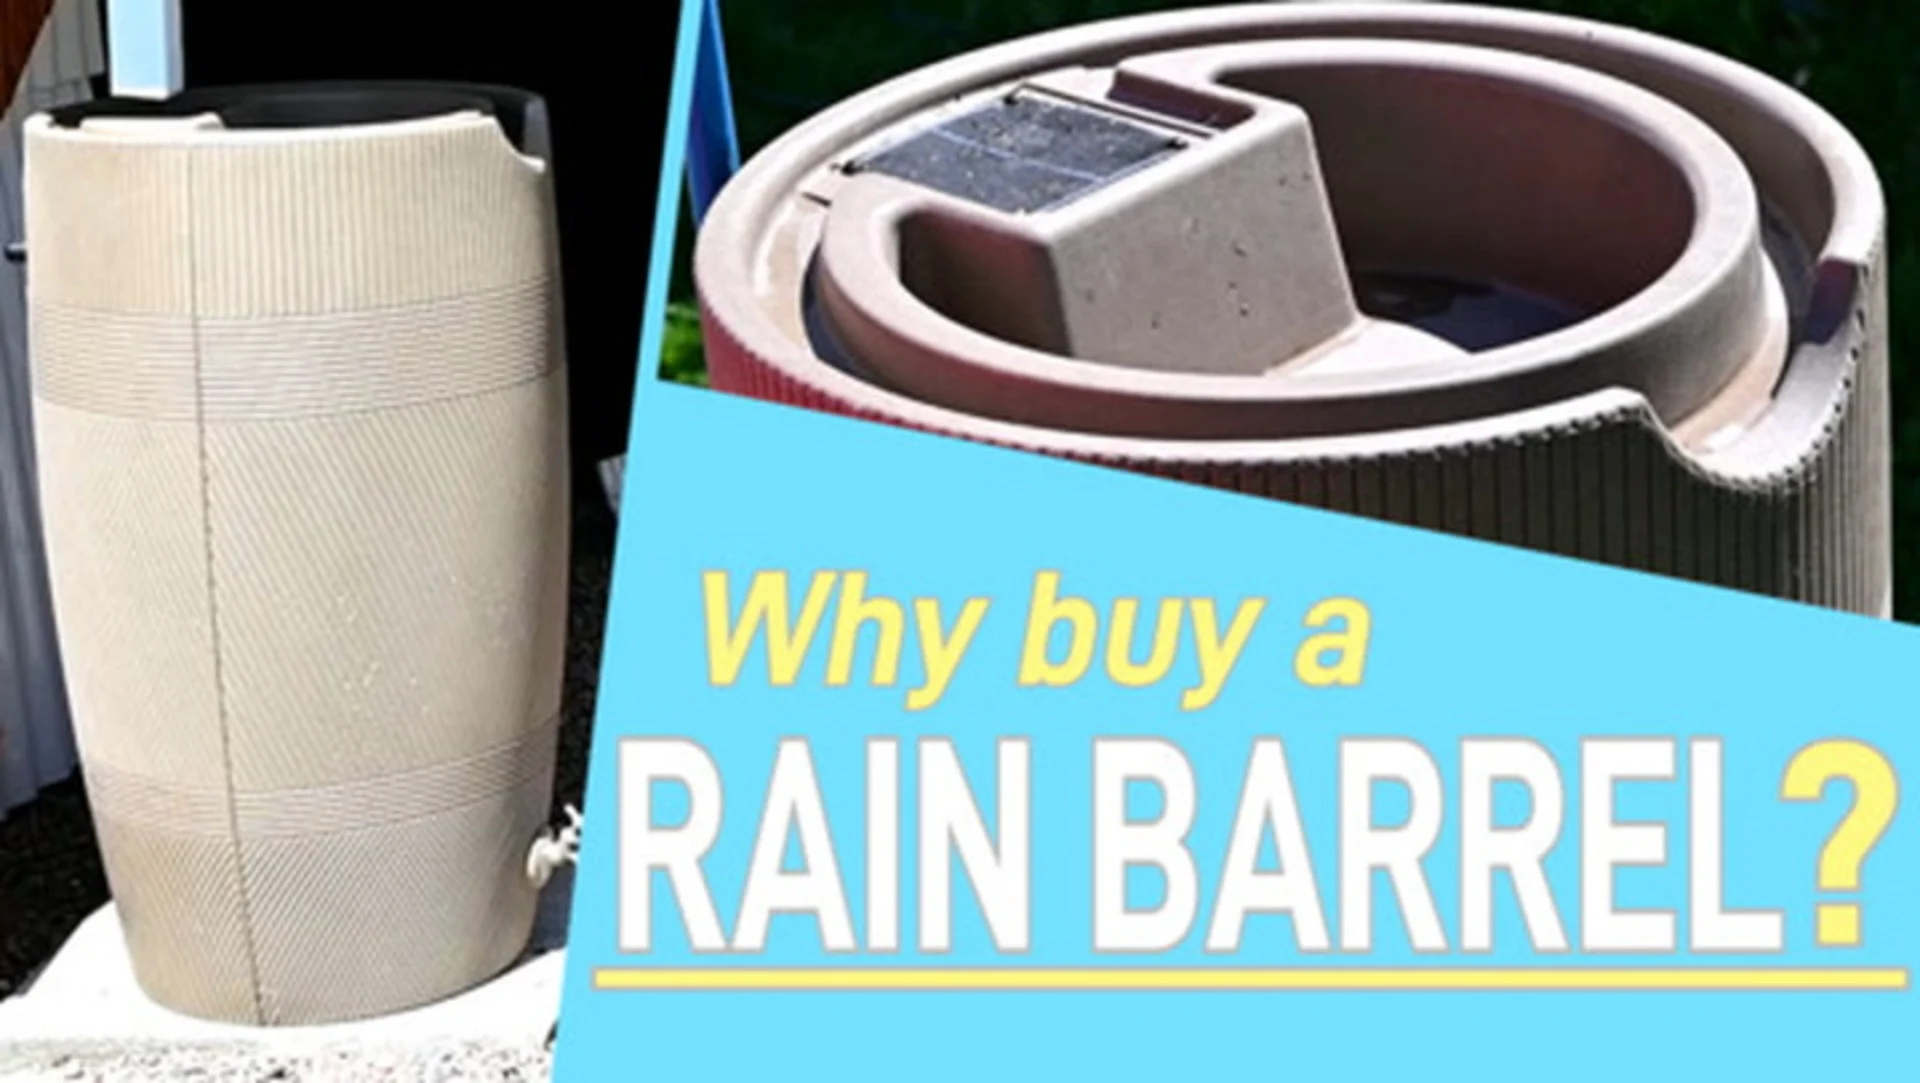 Your garden and the environment will both benefit from rain barrels. How to improve your gardening "game," here